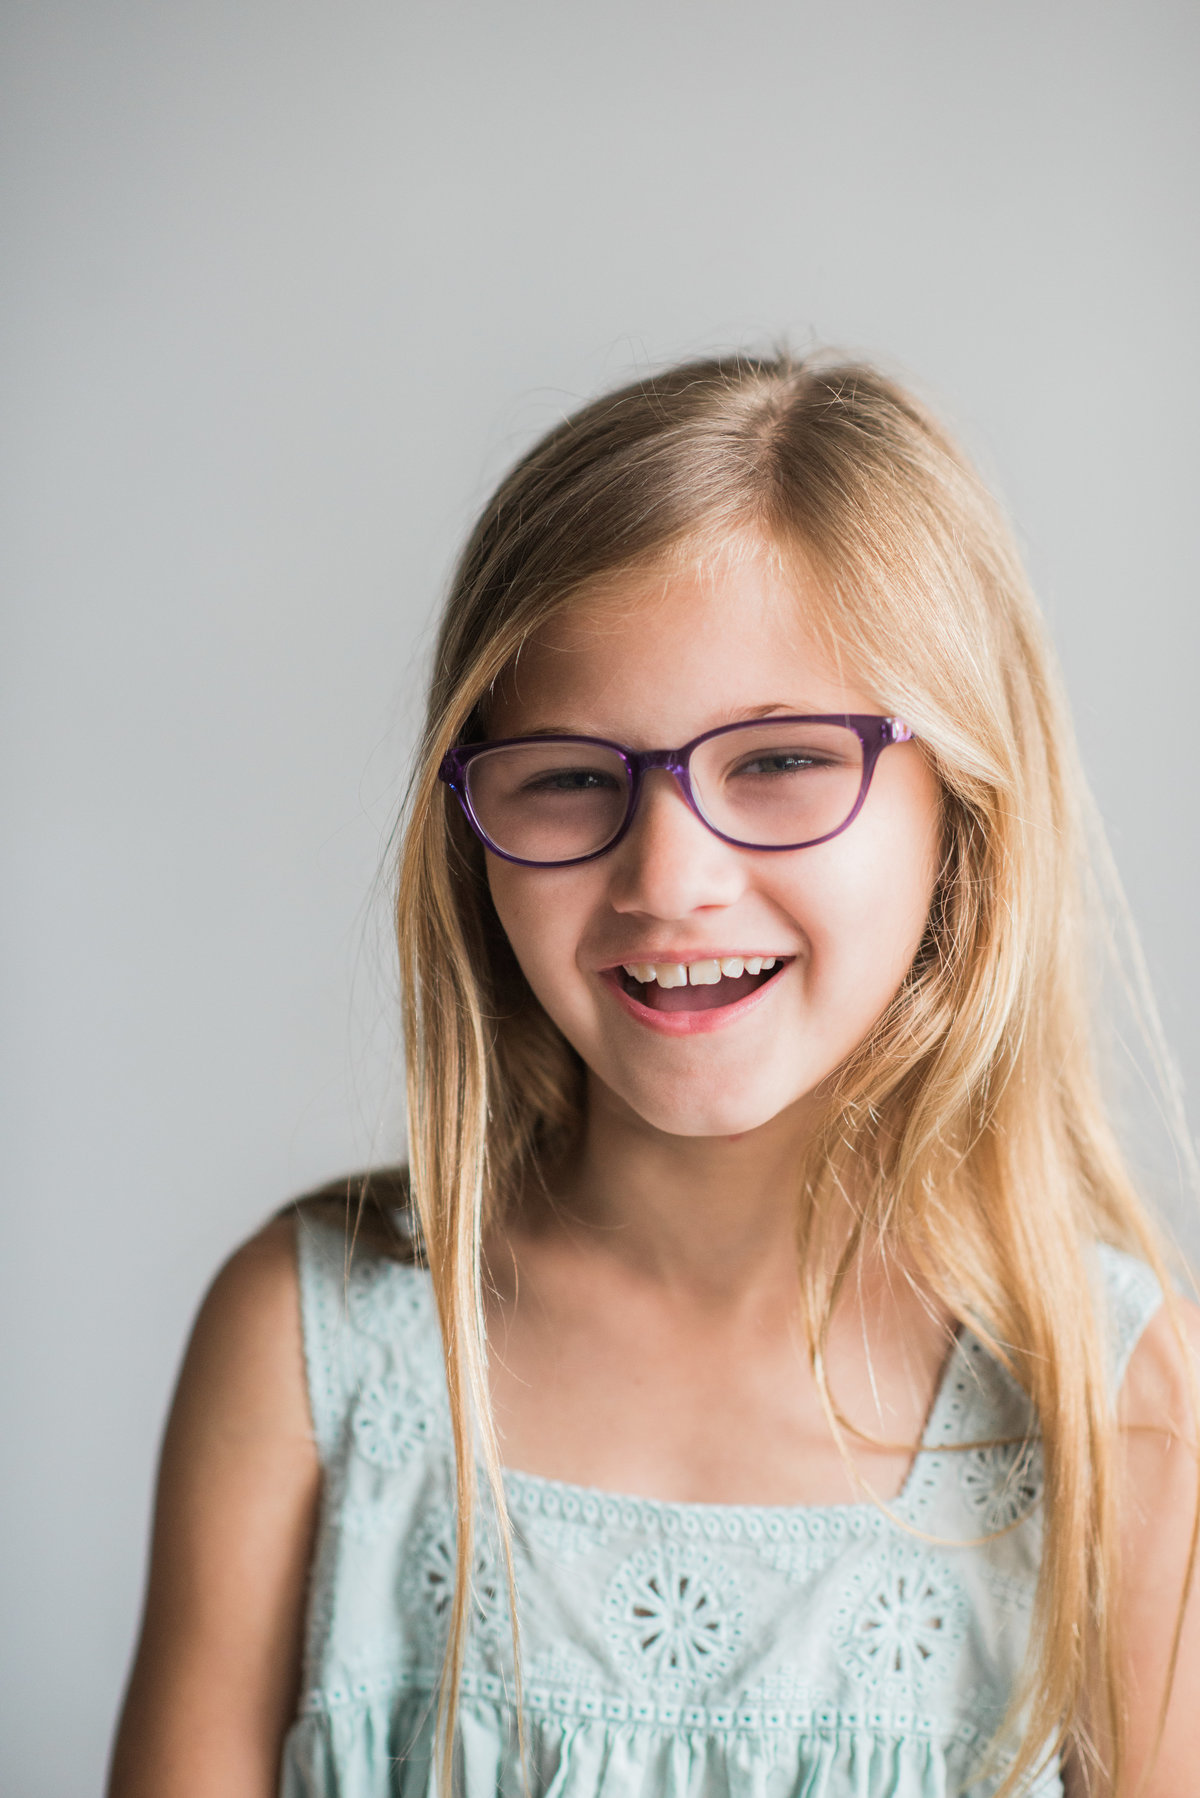 blonde girl laughing with glasses